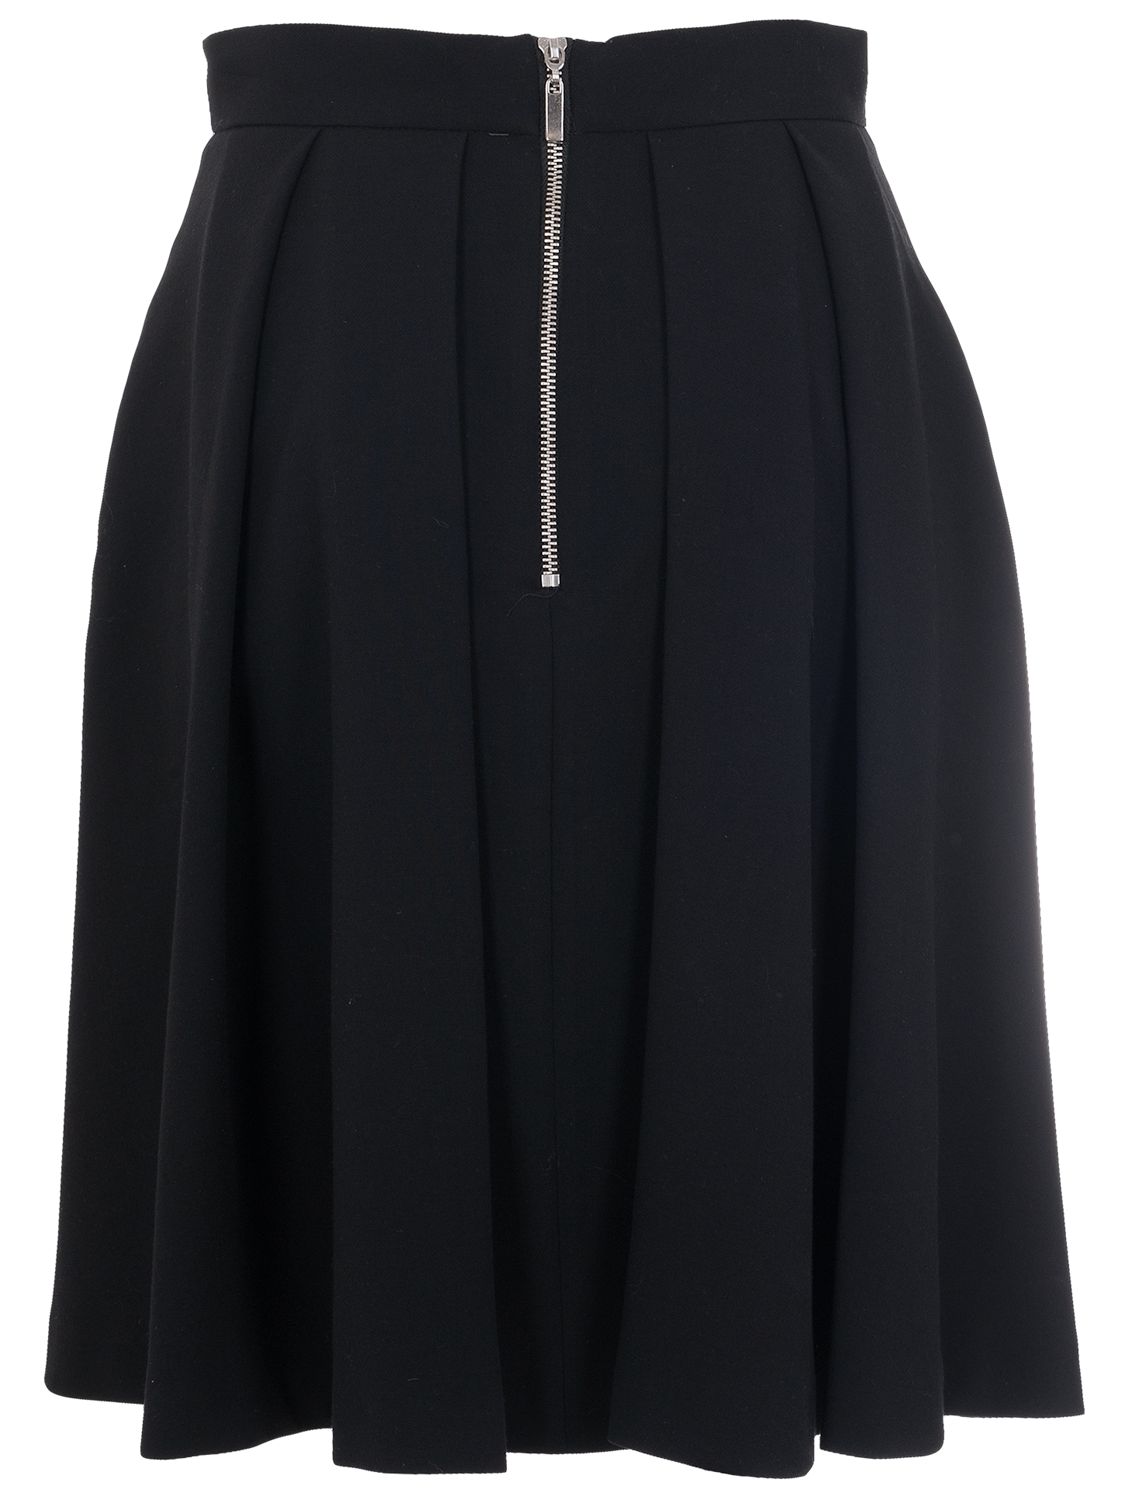 French Connection Whisper Ruth Flared Skirt, Black